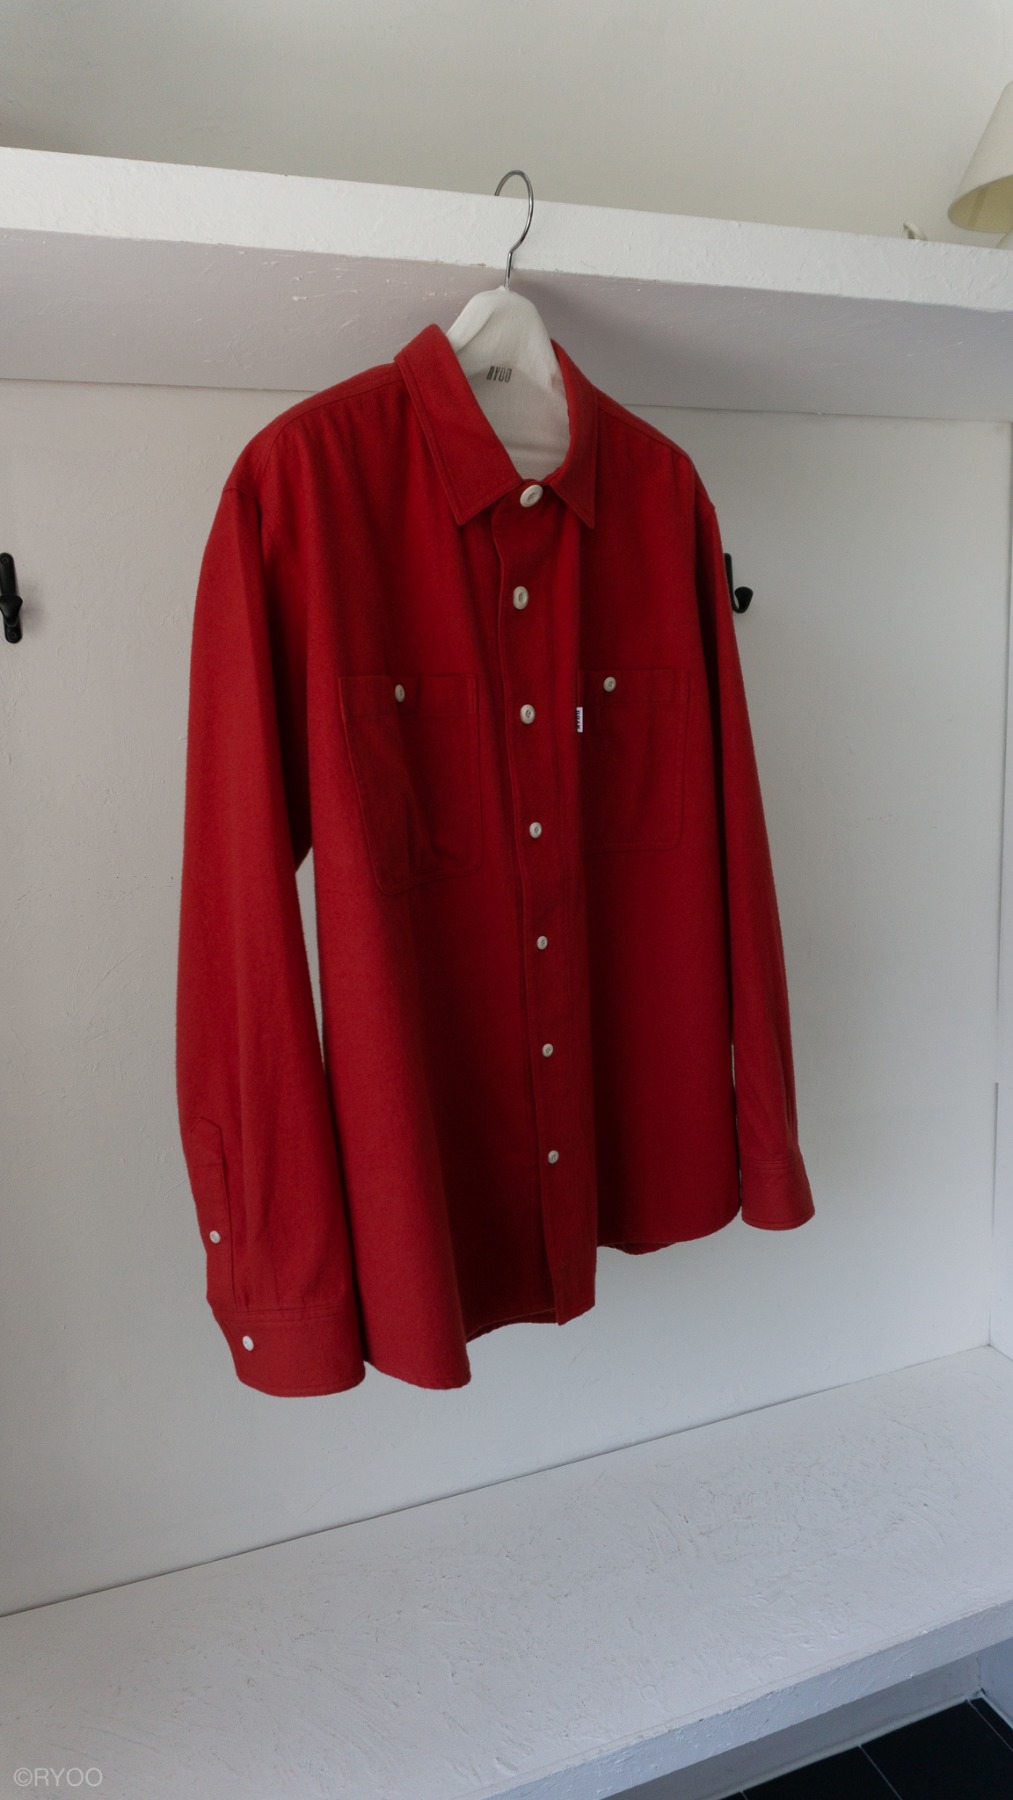 Vanves Shirts #1 [Red]